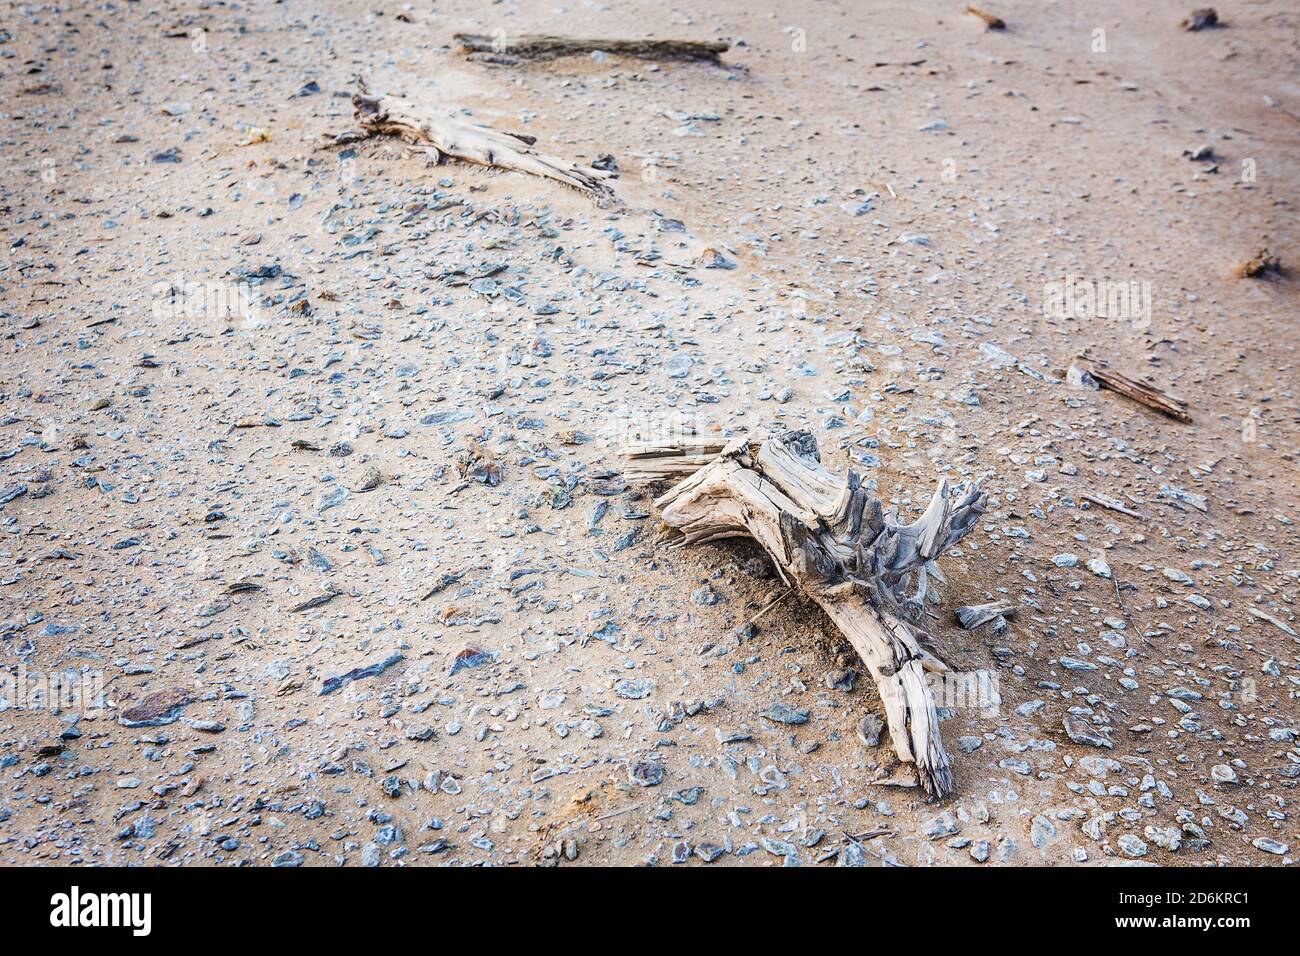 ecological disaster in desert died-out vegetation Stock Photo